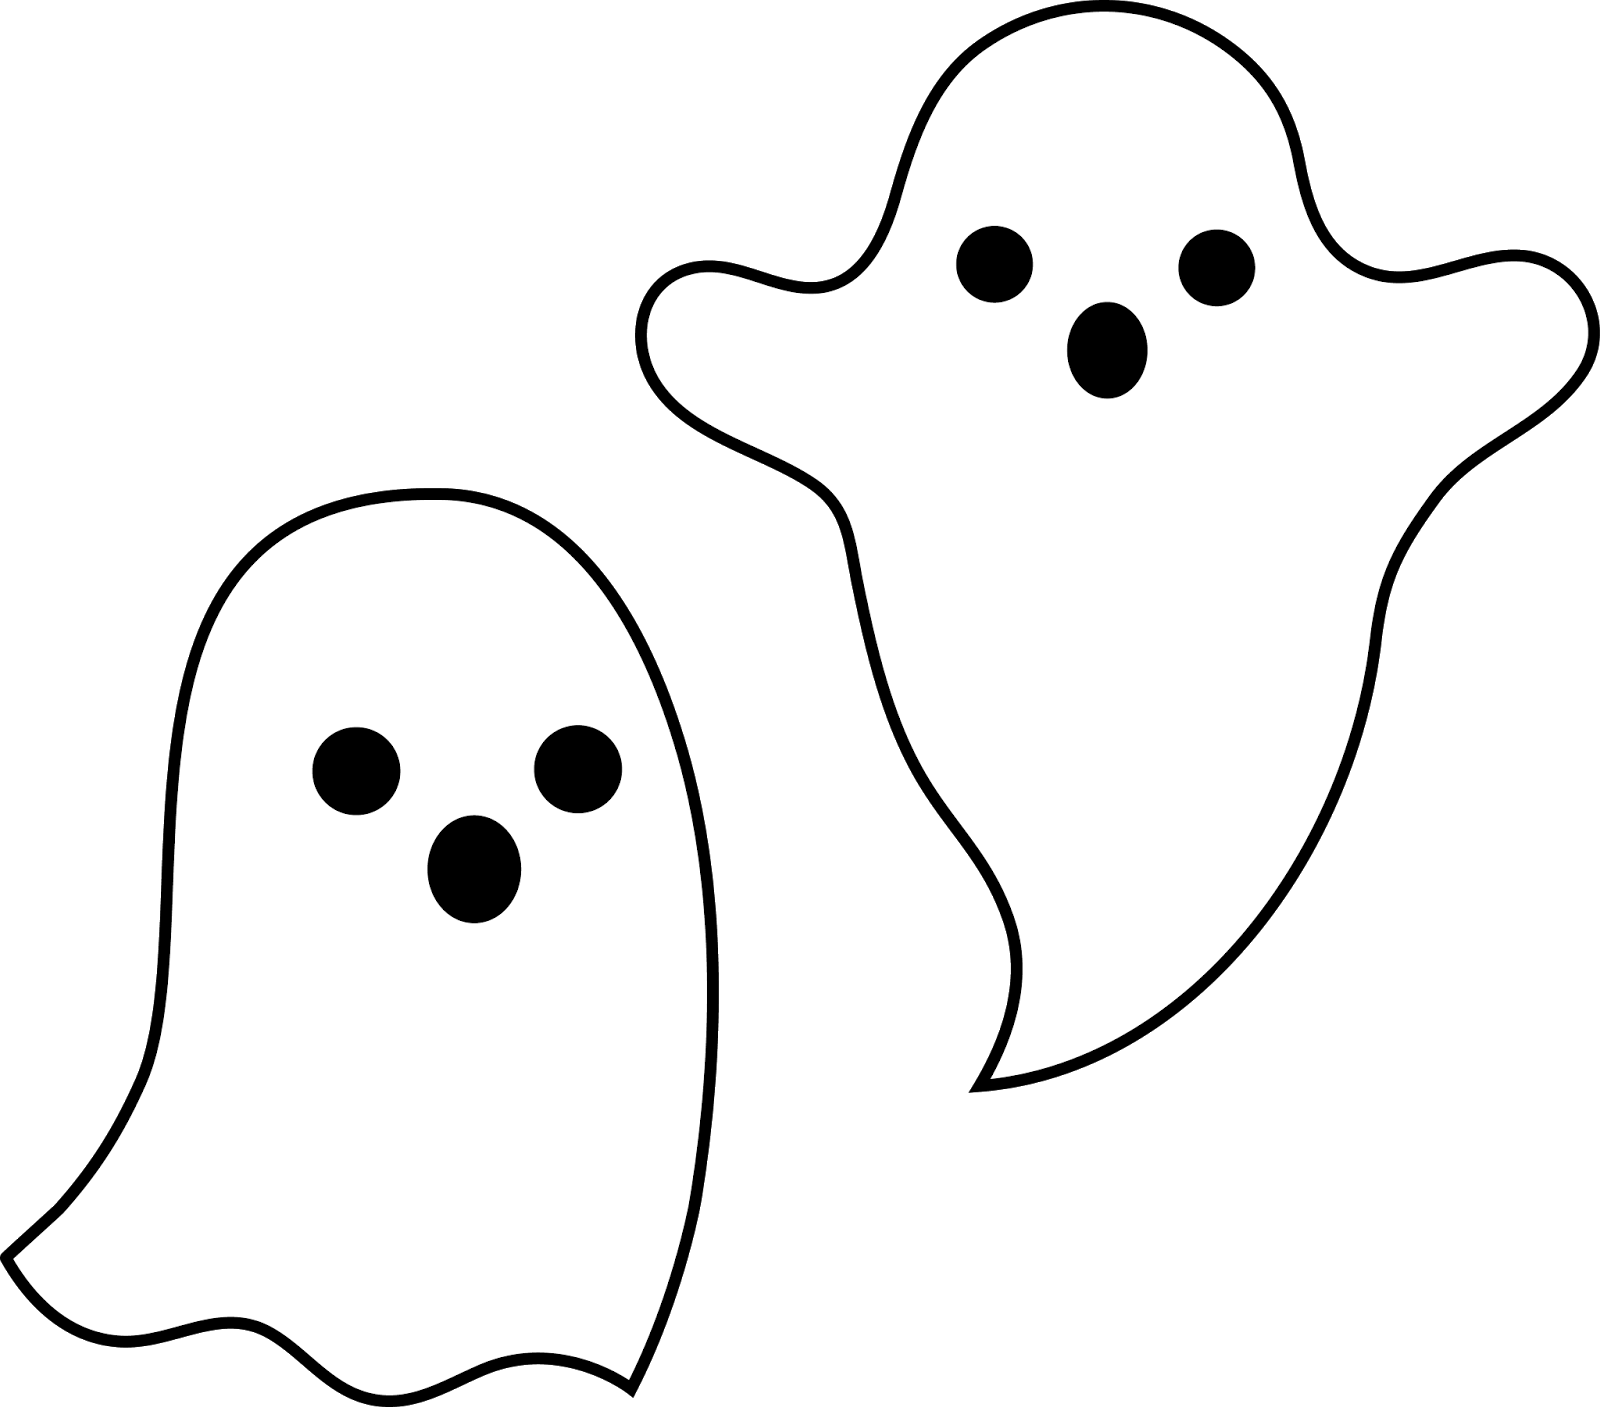 We followed the story. Clipart ghost fun